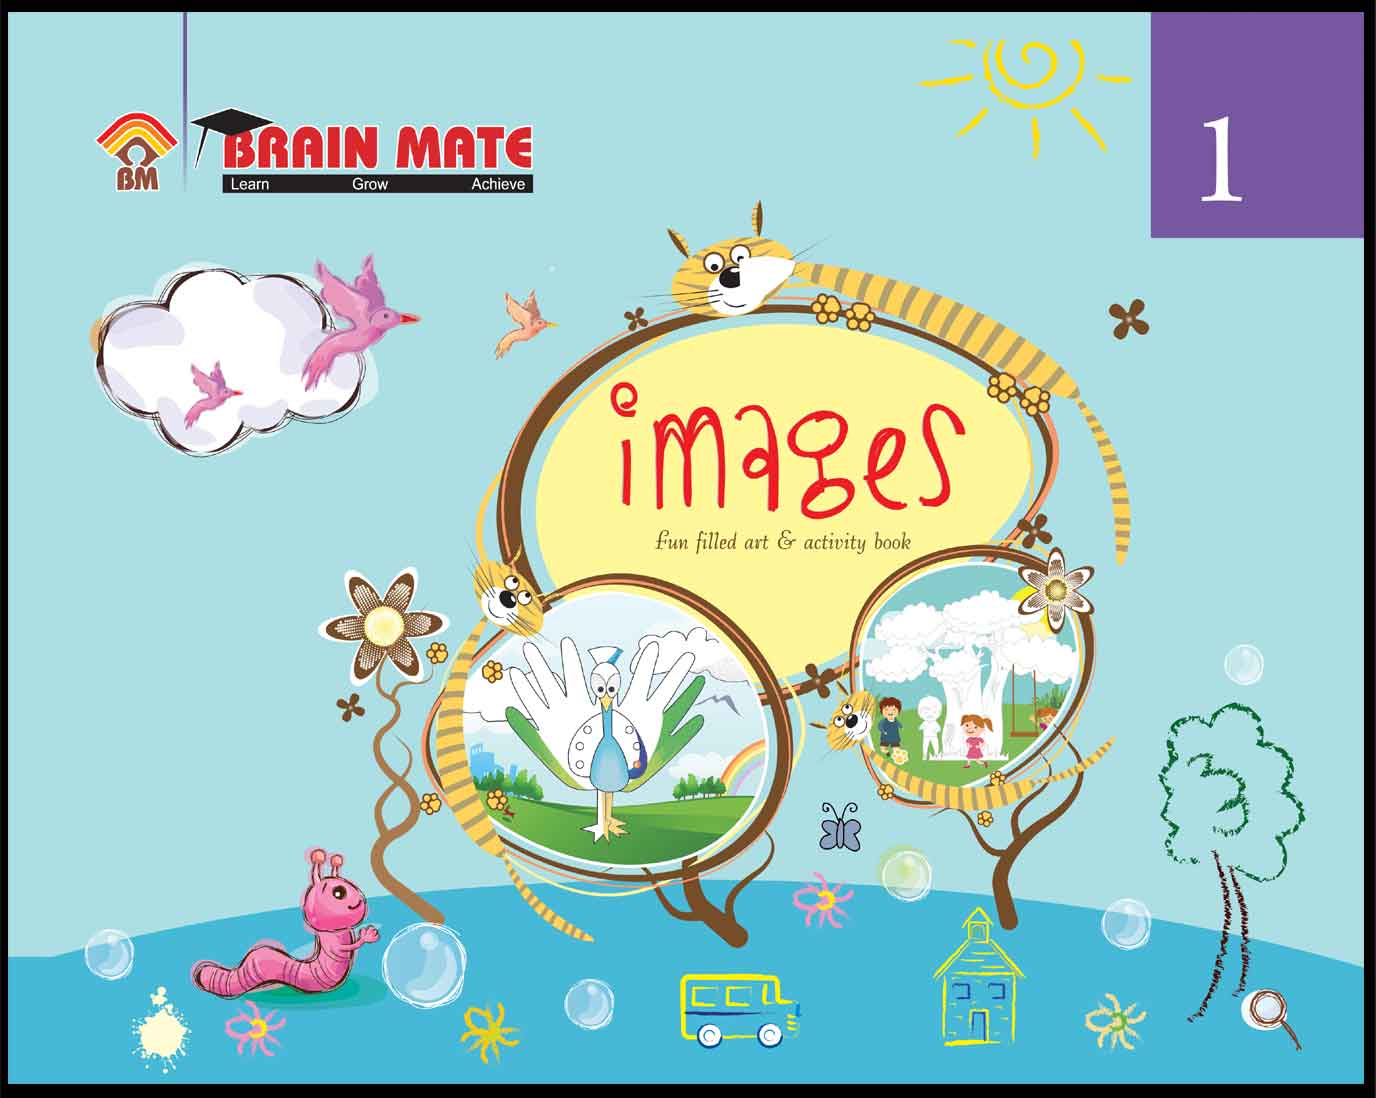 brainmate of Images_1